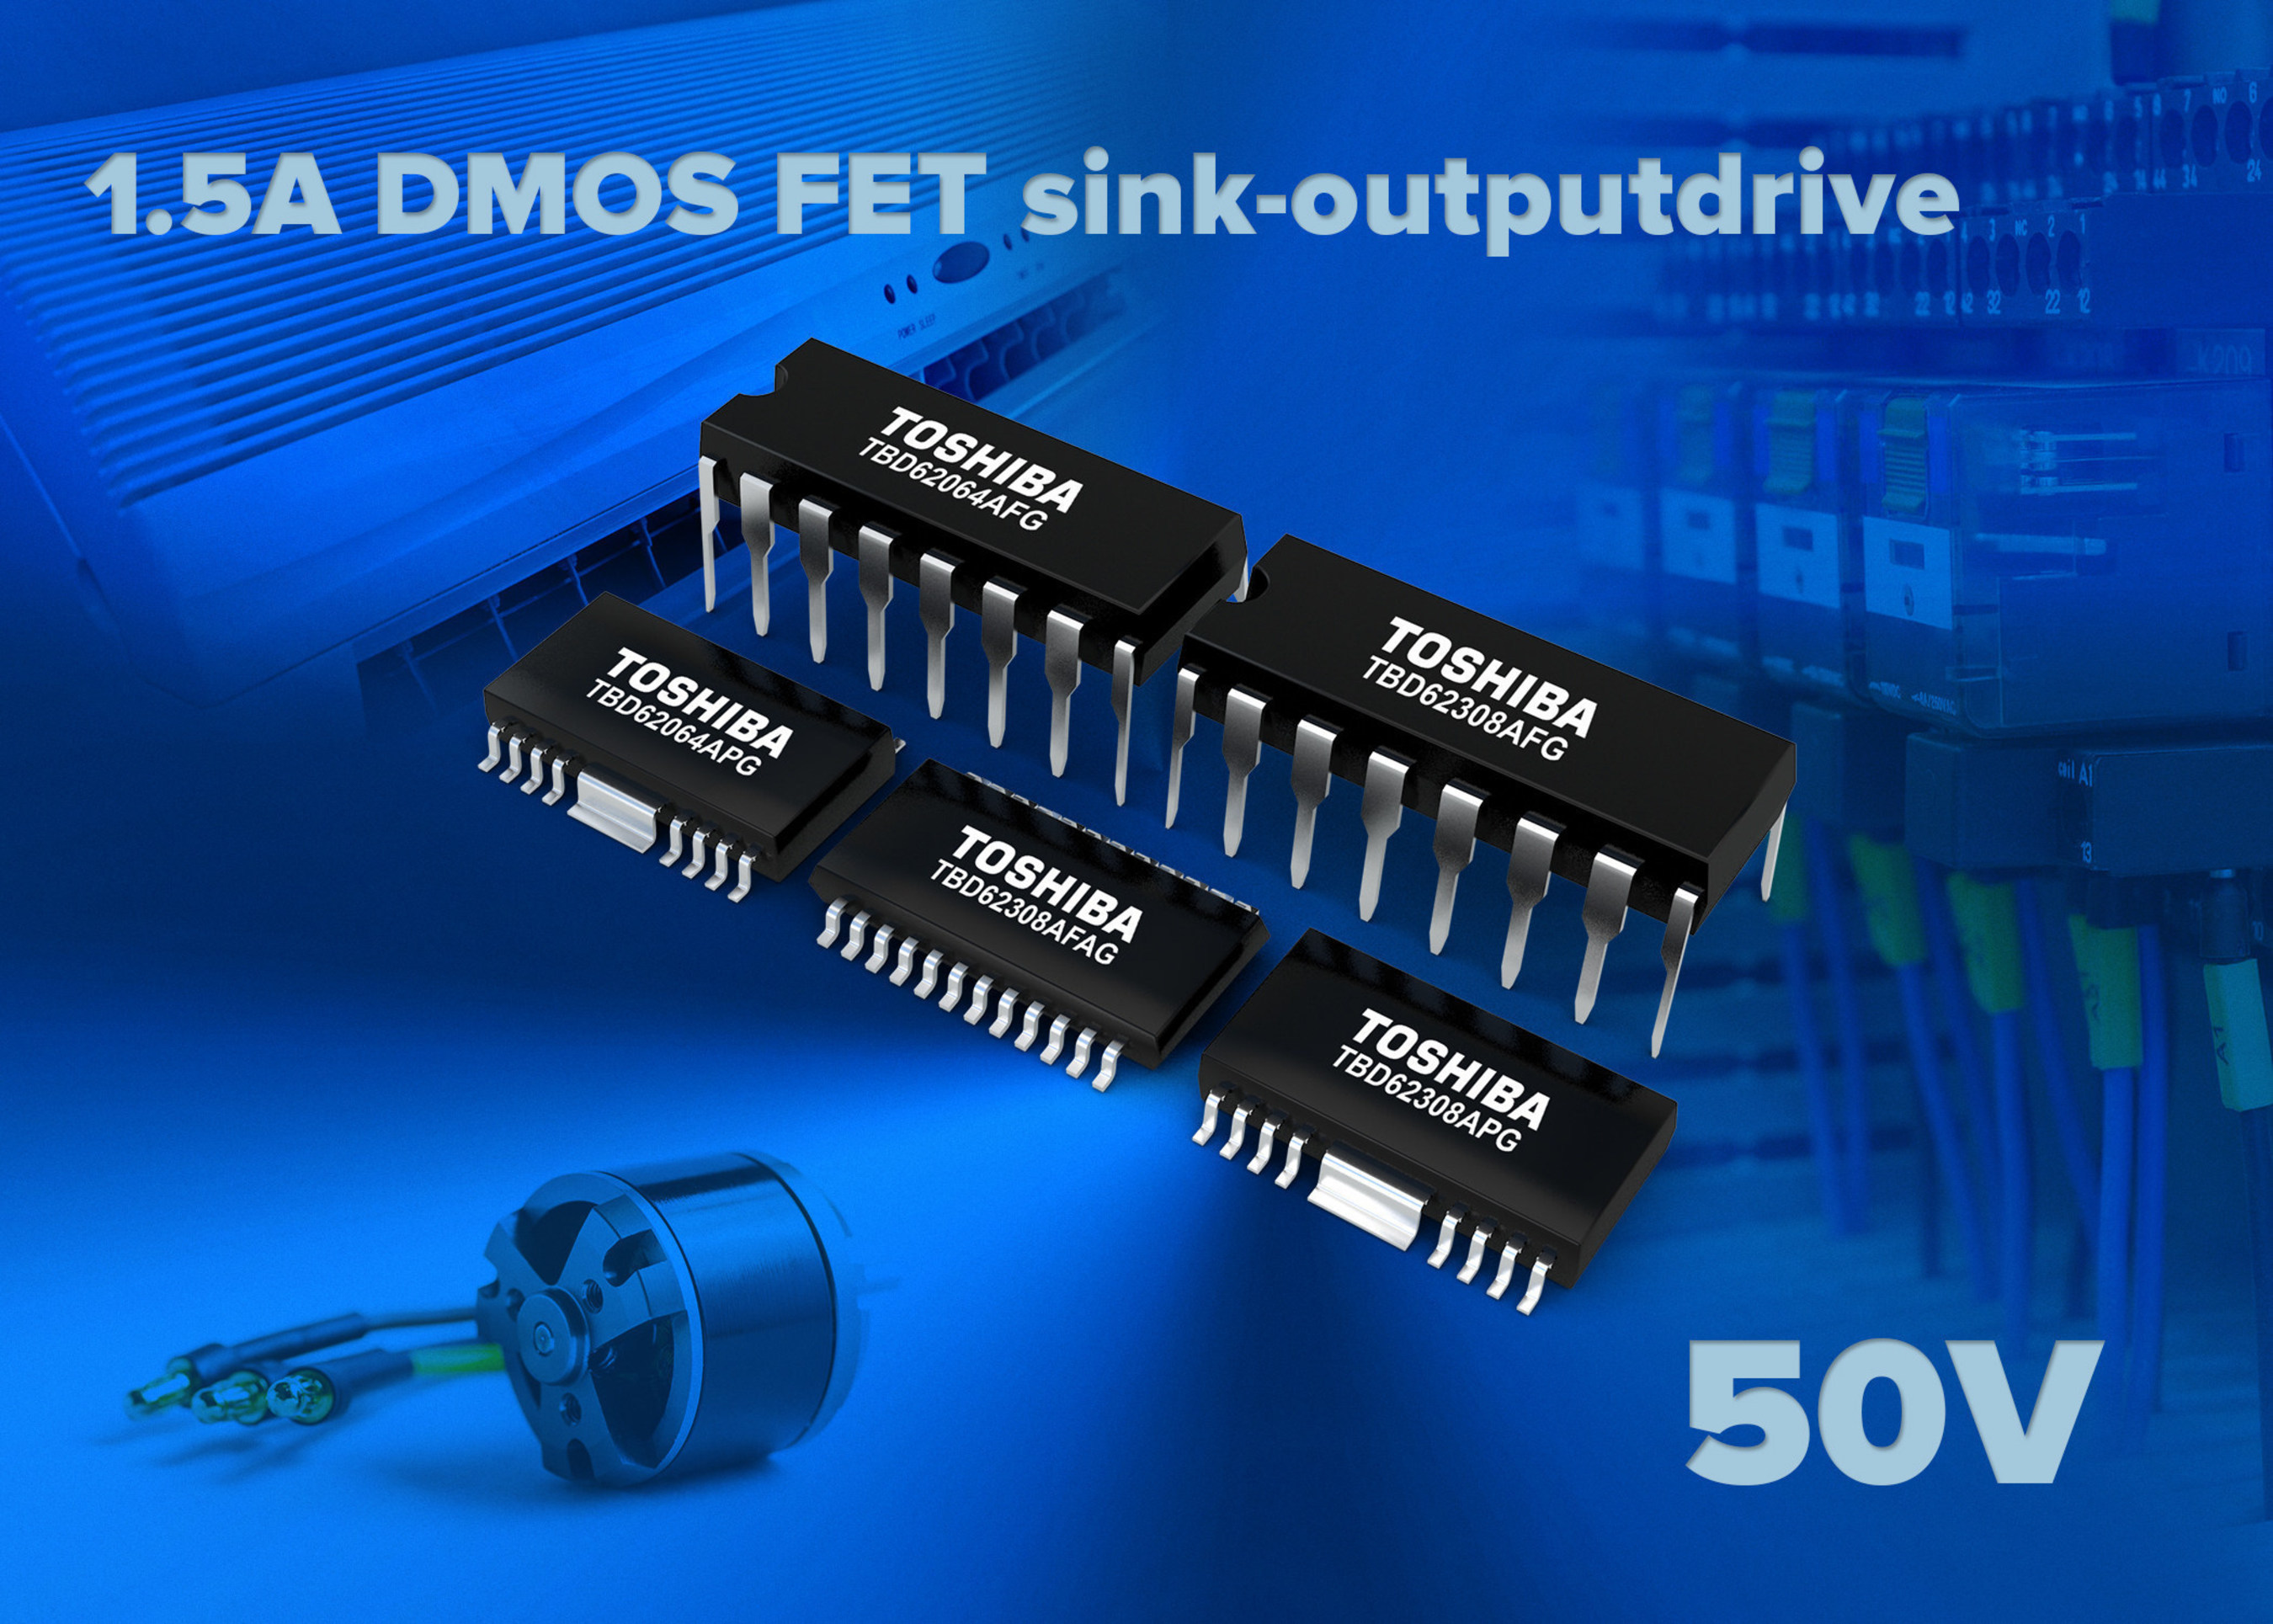 Toshiba's new TBD62064A and TBD62308A series of DMOS FET arrays cut power loss in high-voltage applications by 38 percent.